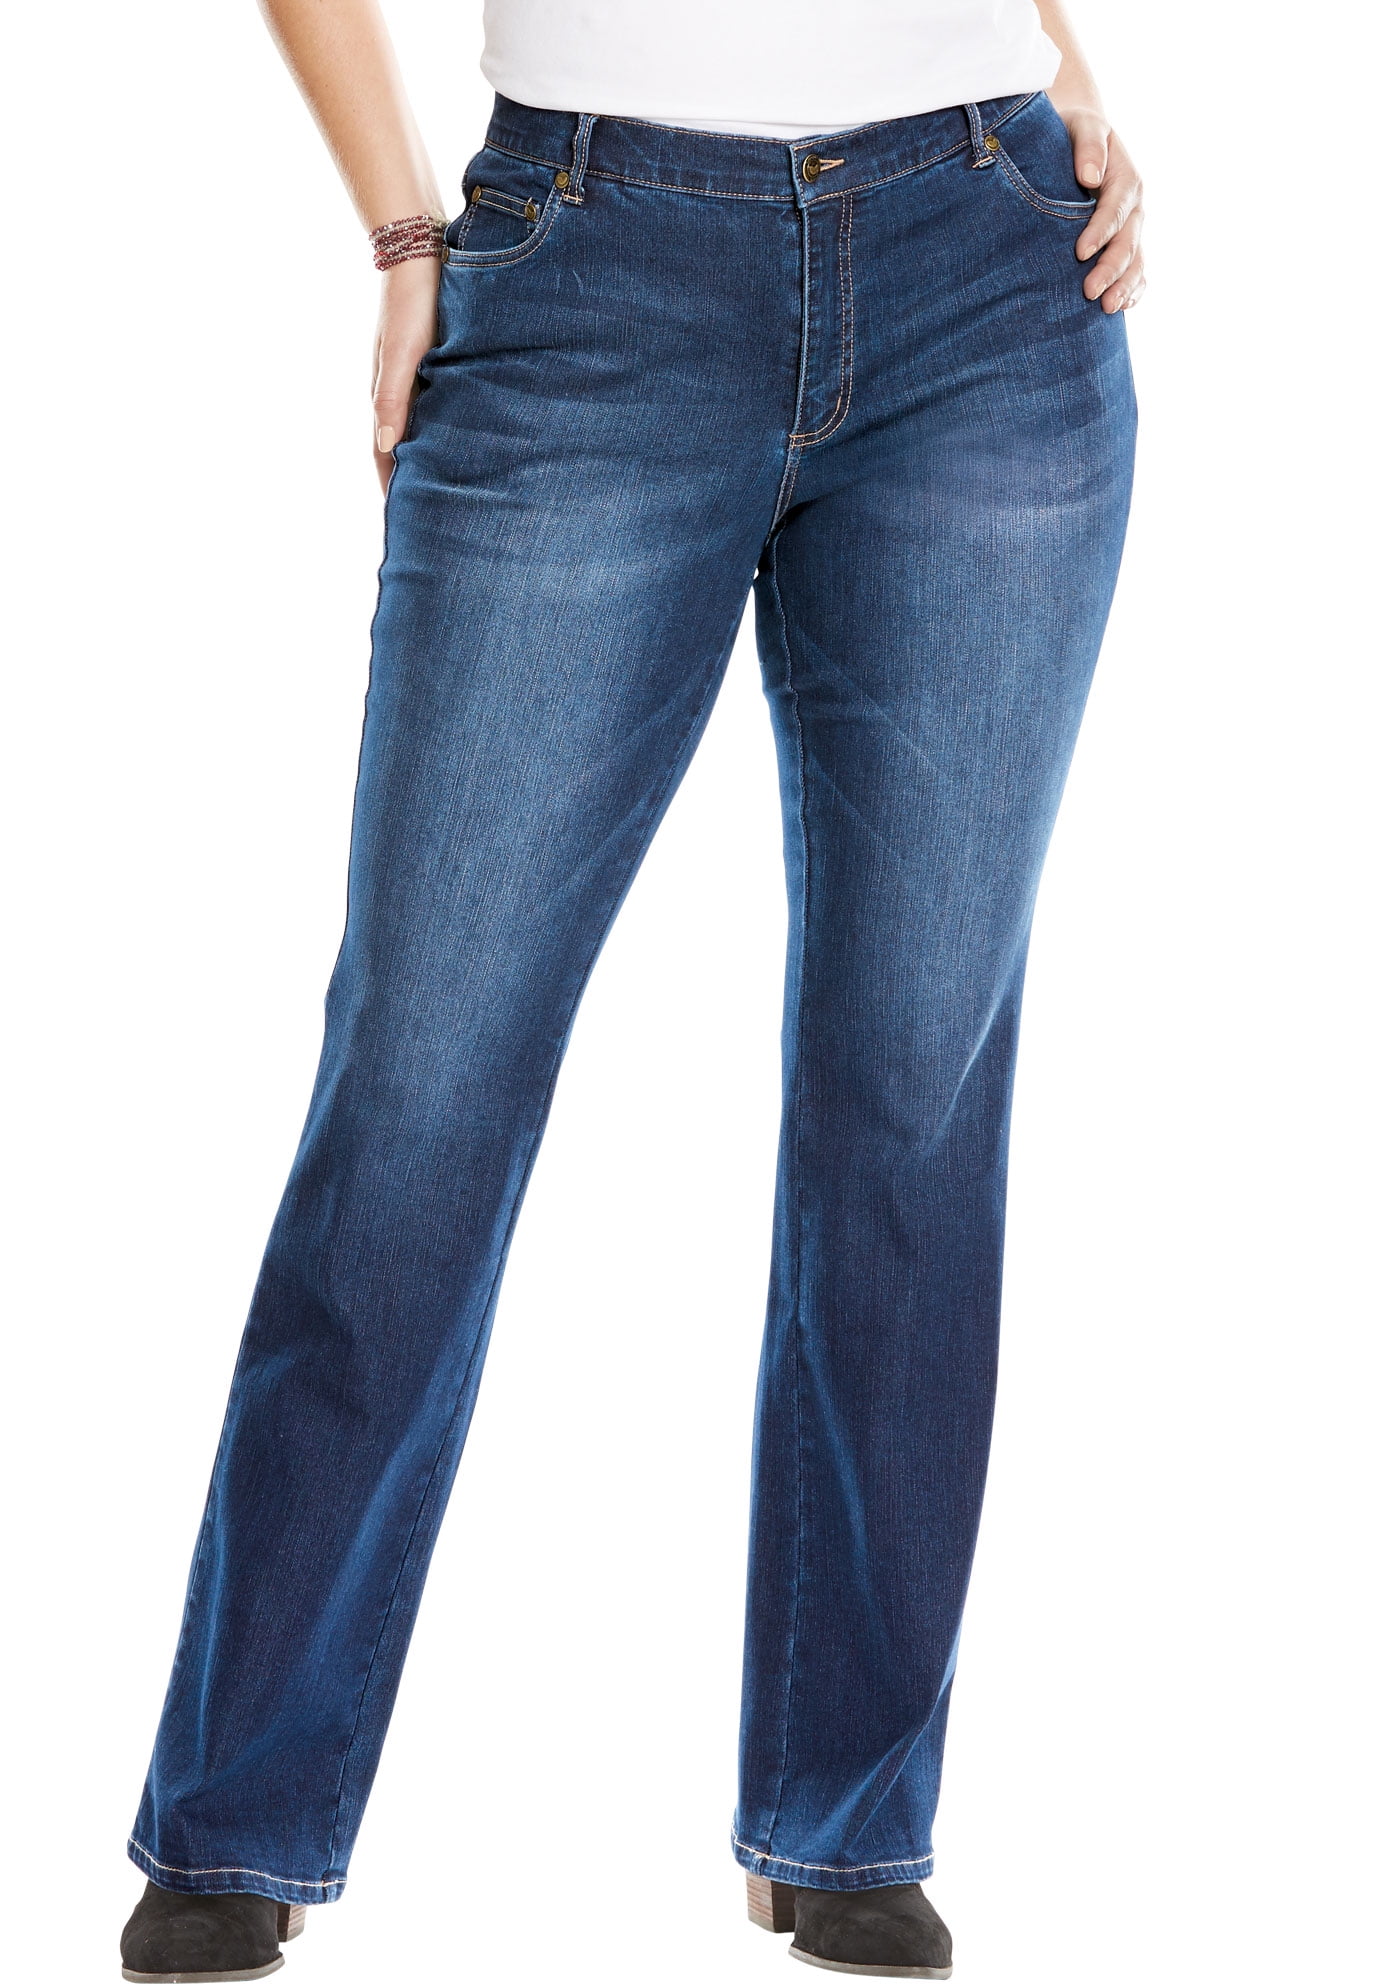 Woman Within - Woman Within Plus Size Tall Bootcut Stretch Jean Jeans ...